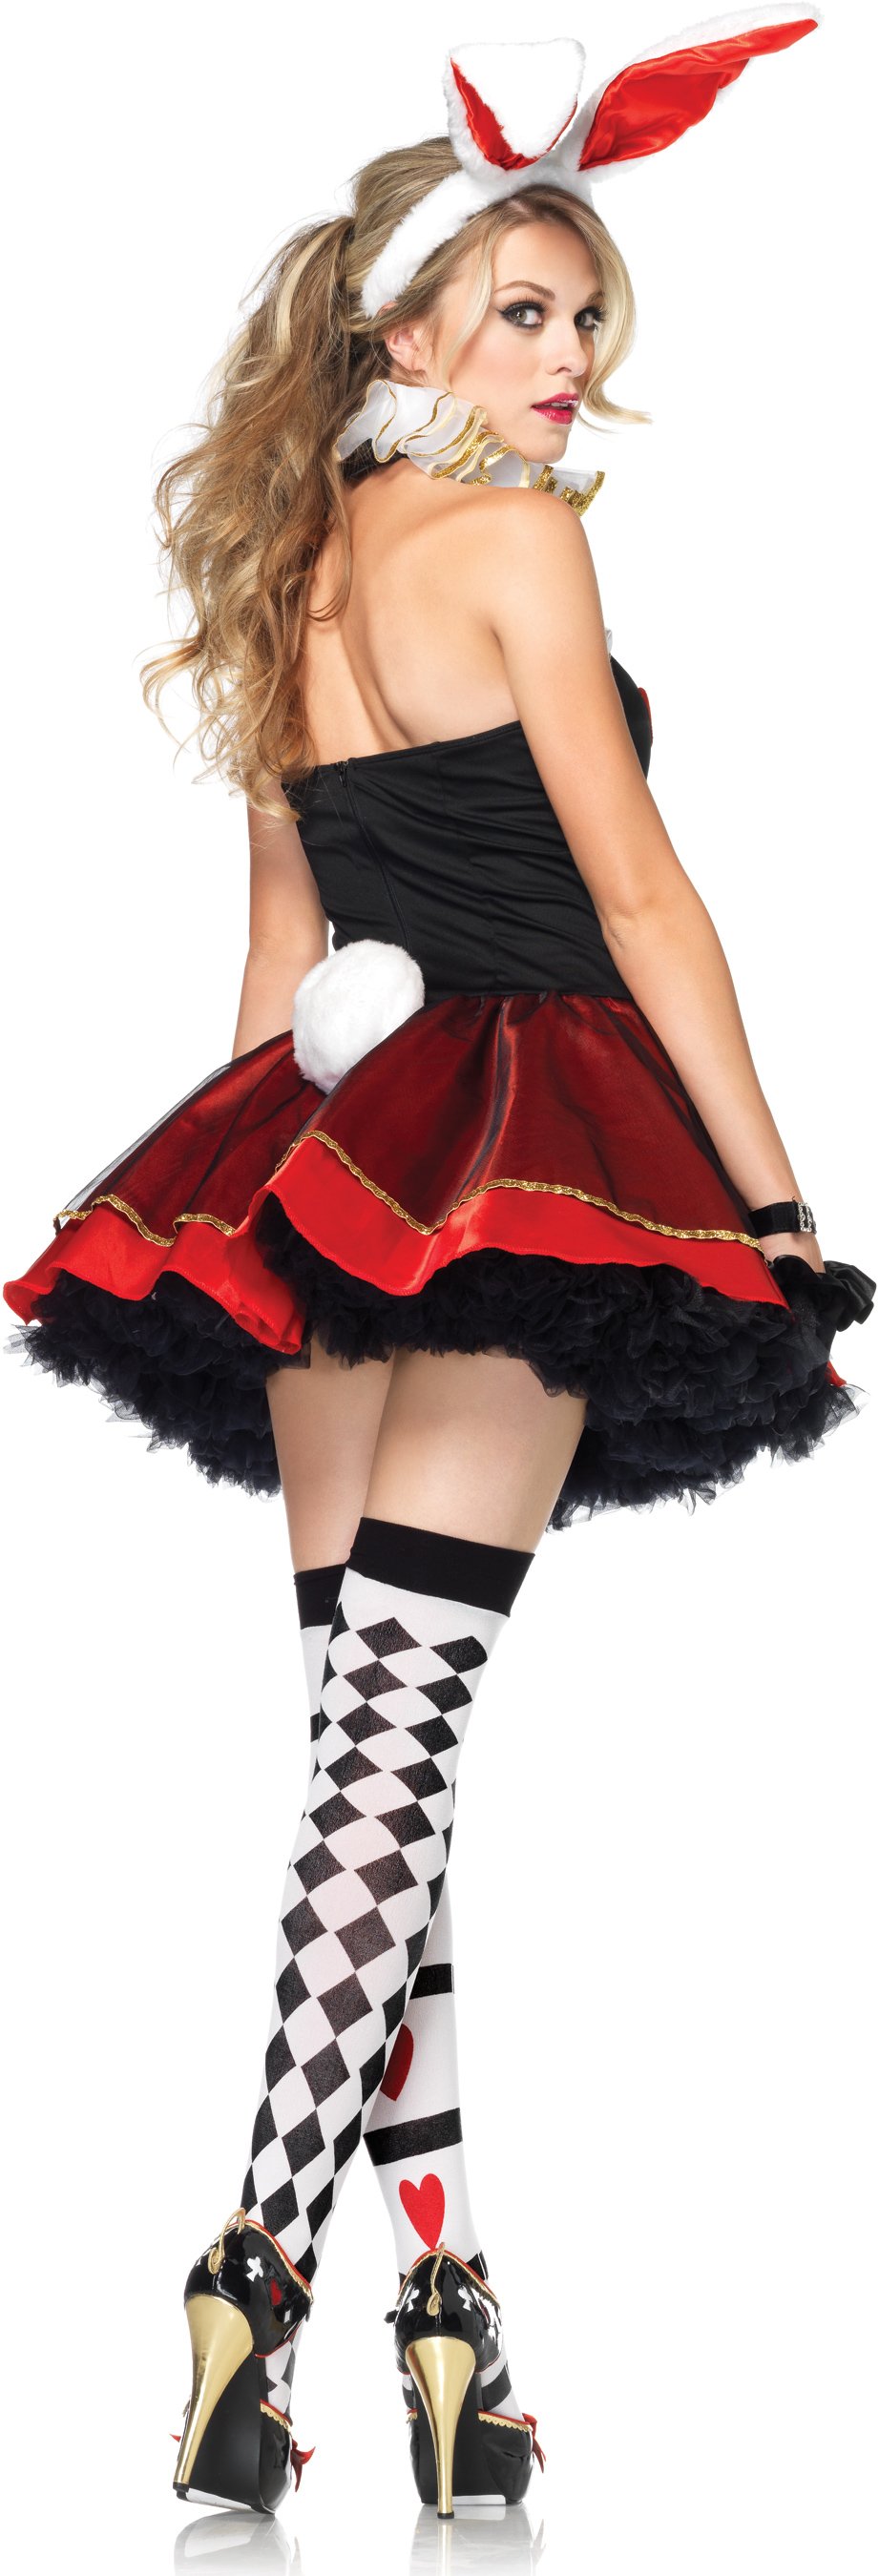 Tea Party Bunny Adult Costume - Click Image to Close